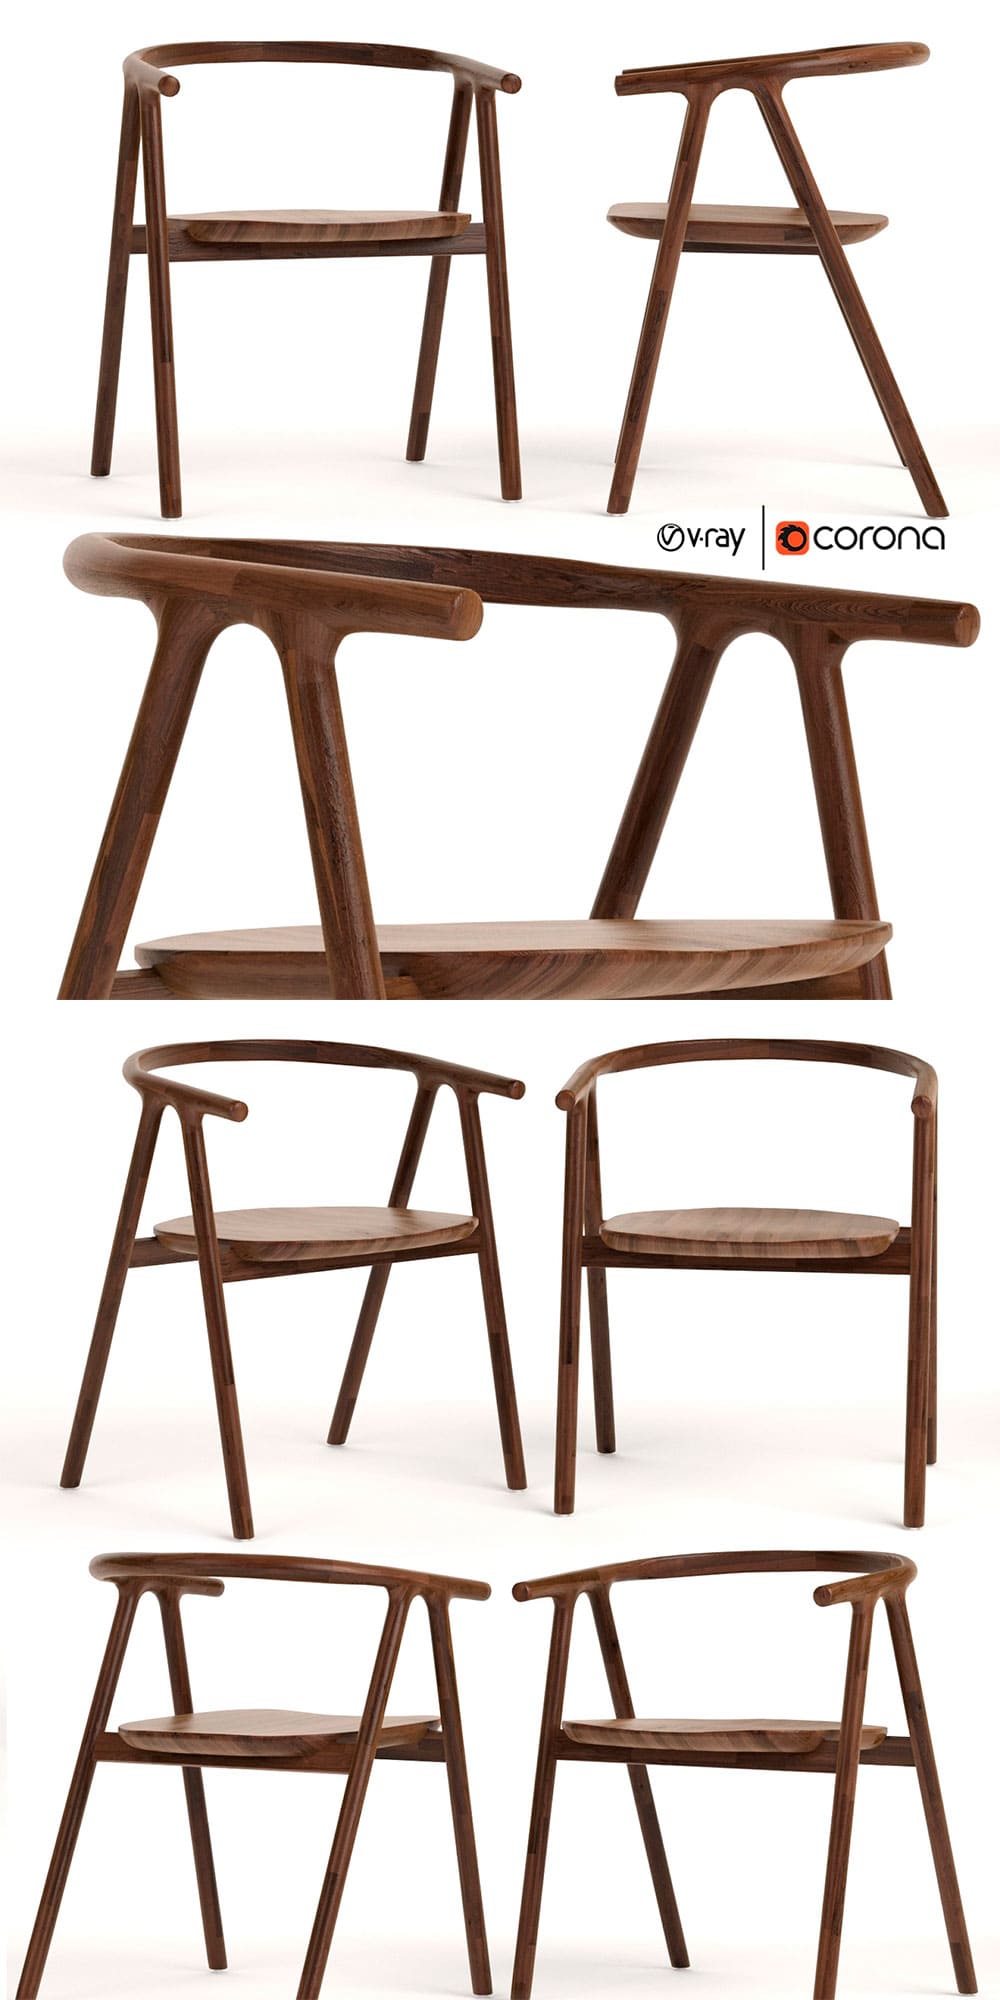 Tanaka dining chair industry west, picture for pinterest.